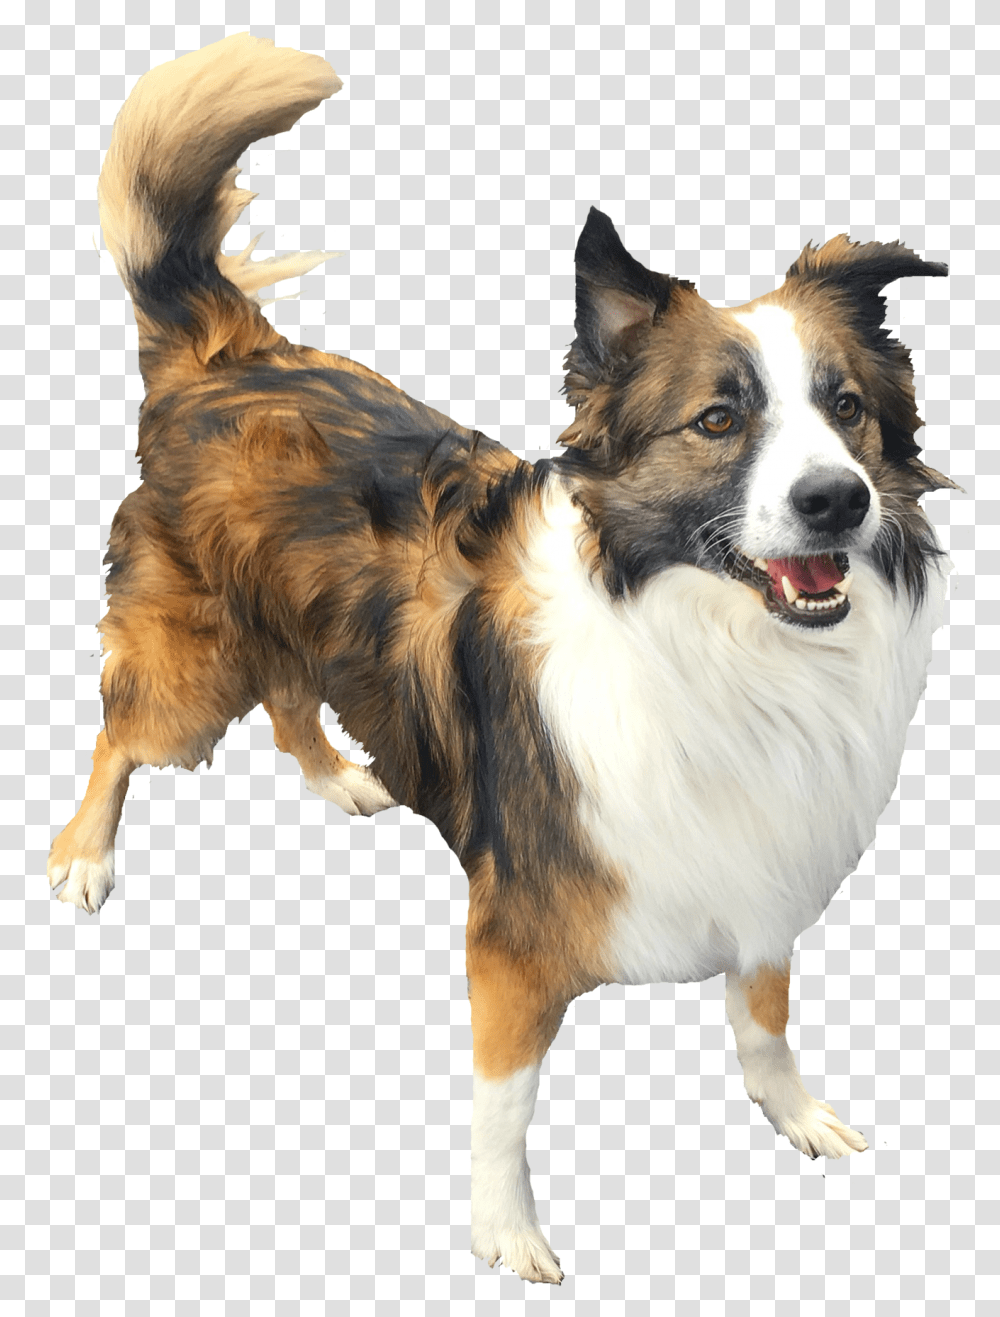 Contact UsClass Lazyload Lazyload Fade InData Dog Catches Something, Pet, Canine, Animal, Mammal Transparent Png